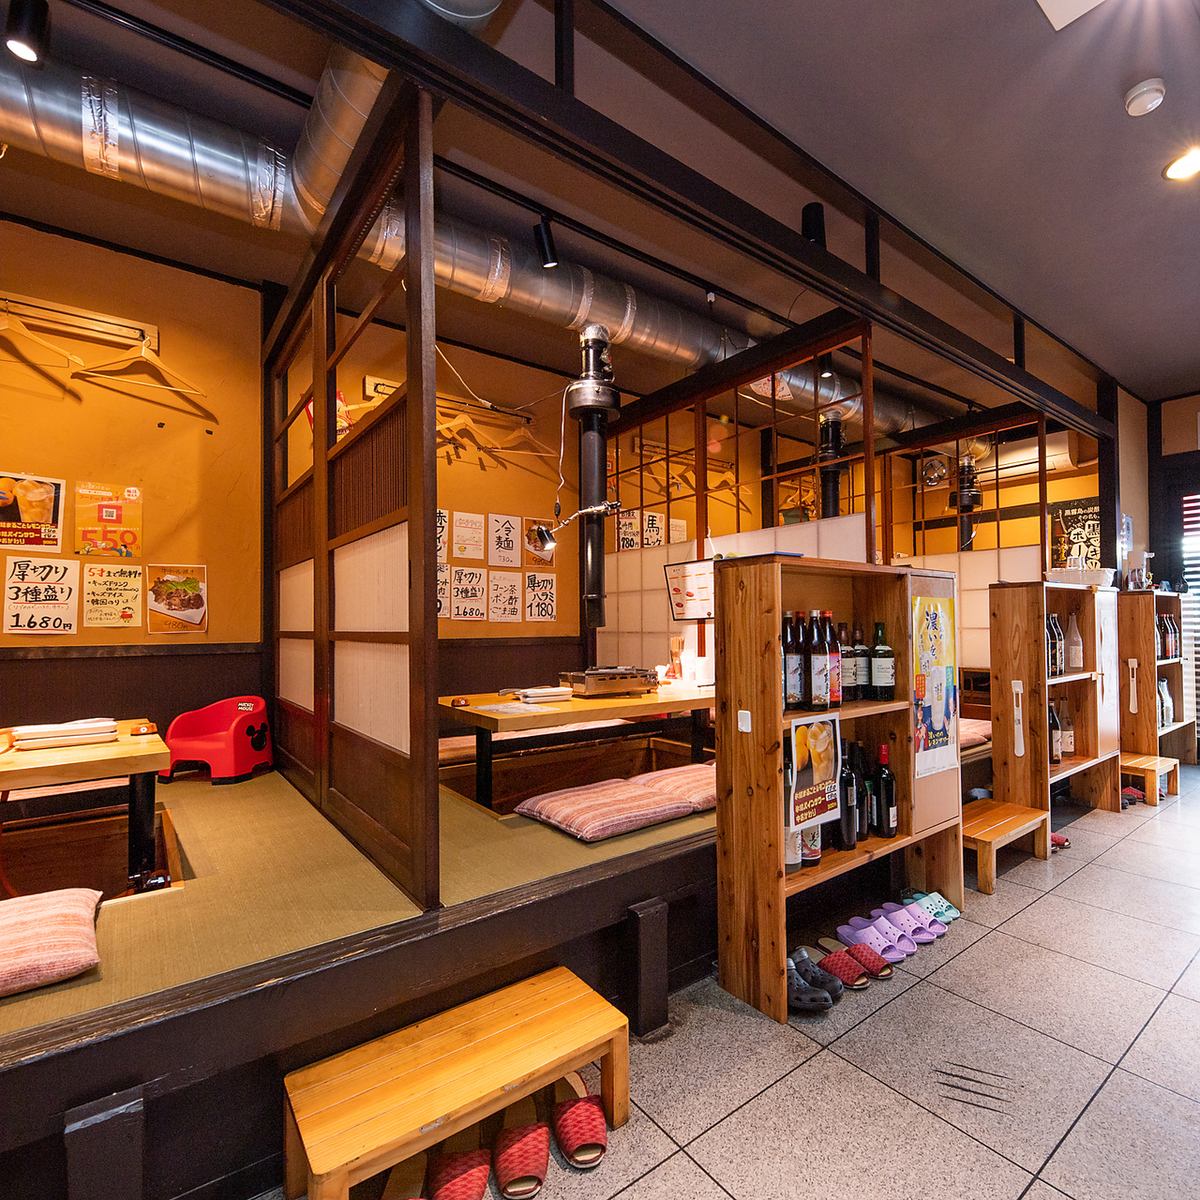 Complete with horigotatsu tatami mats! Chairs and tableware for children are also available!